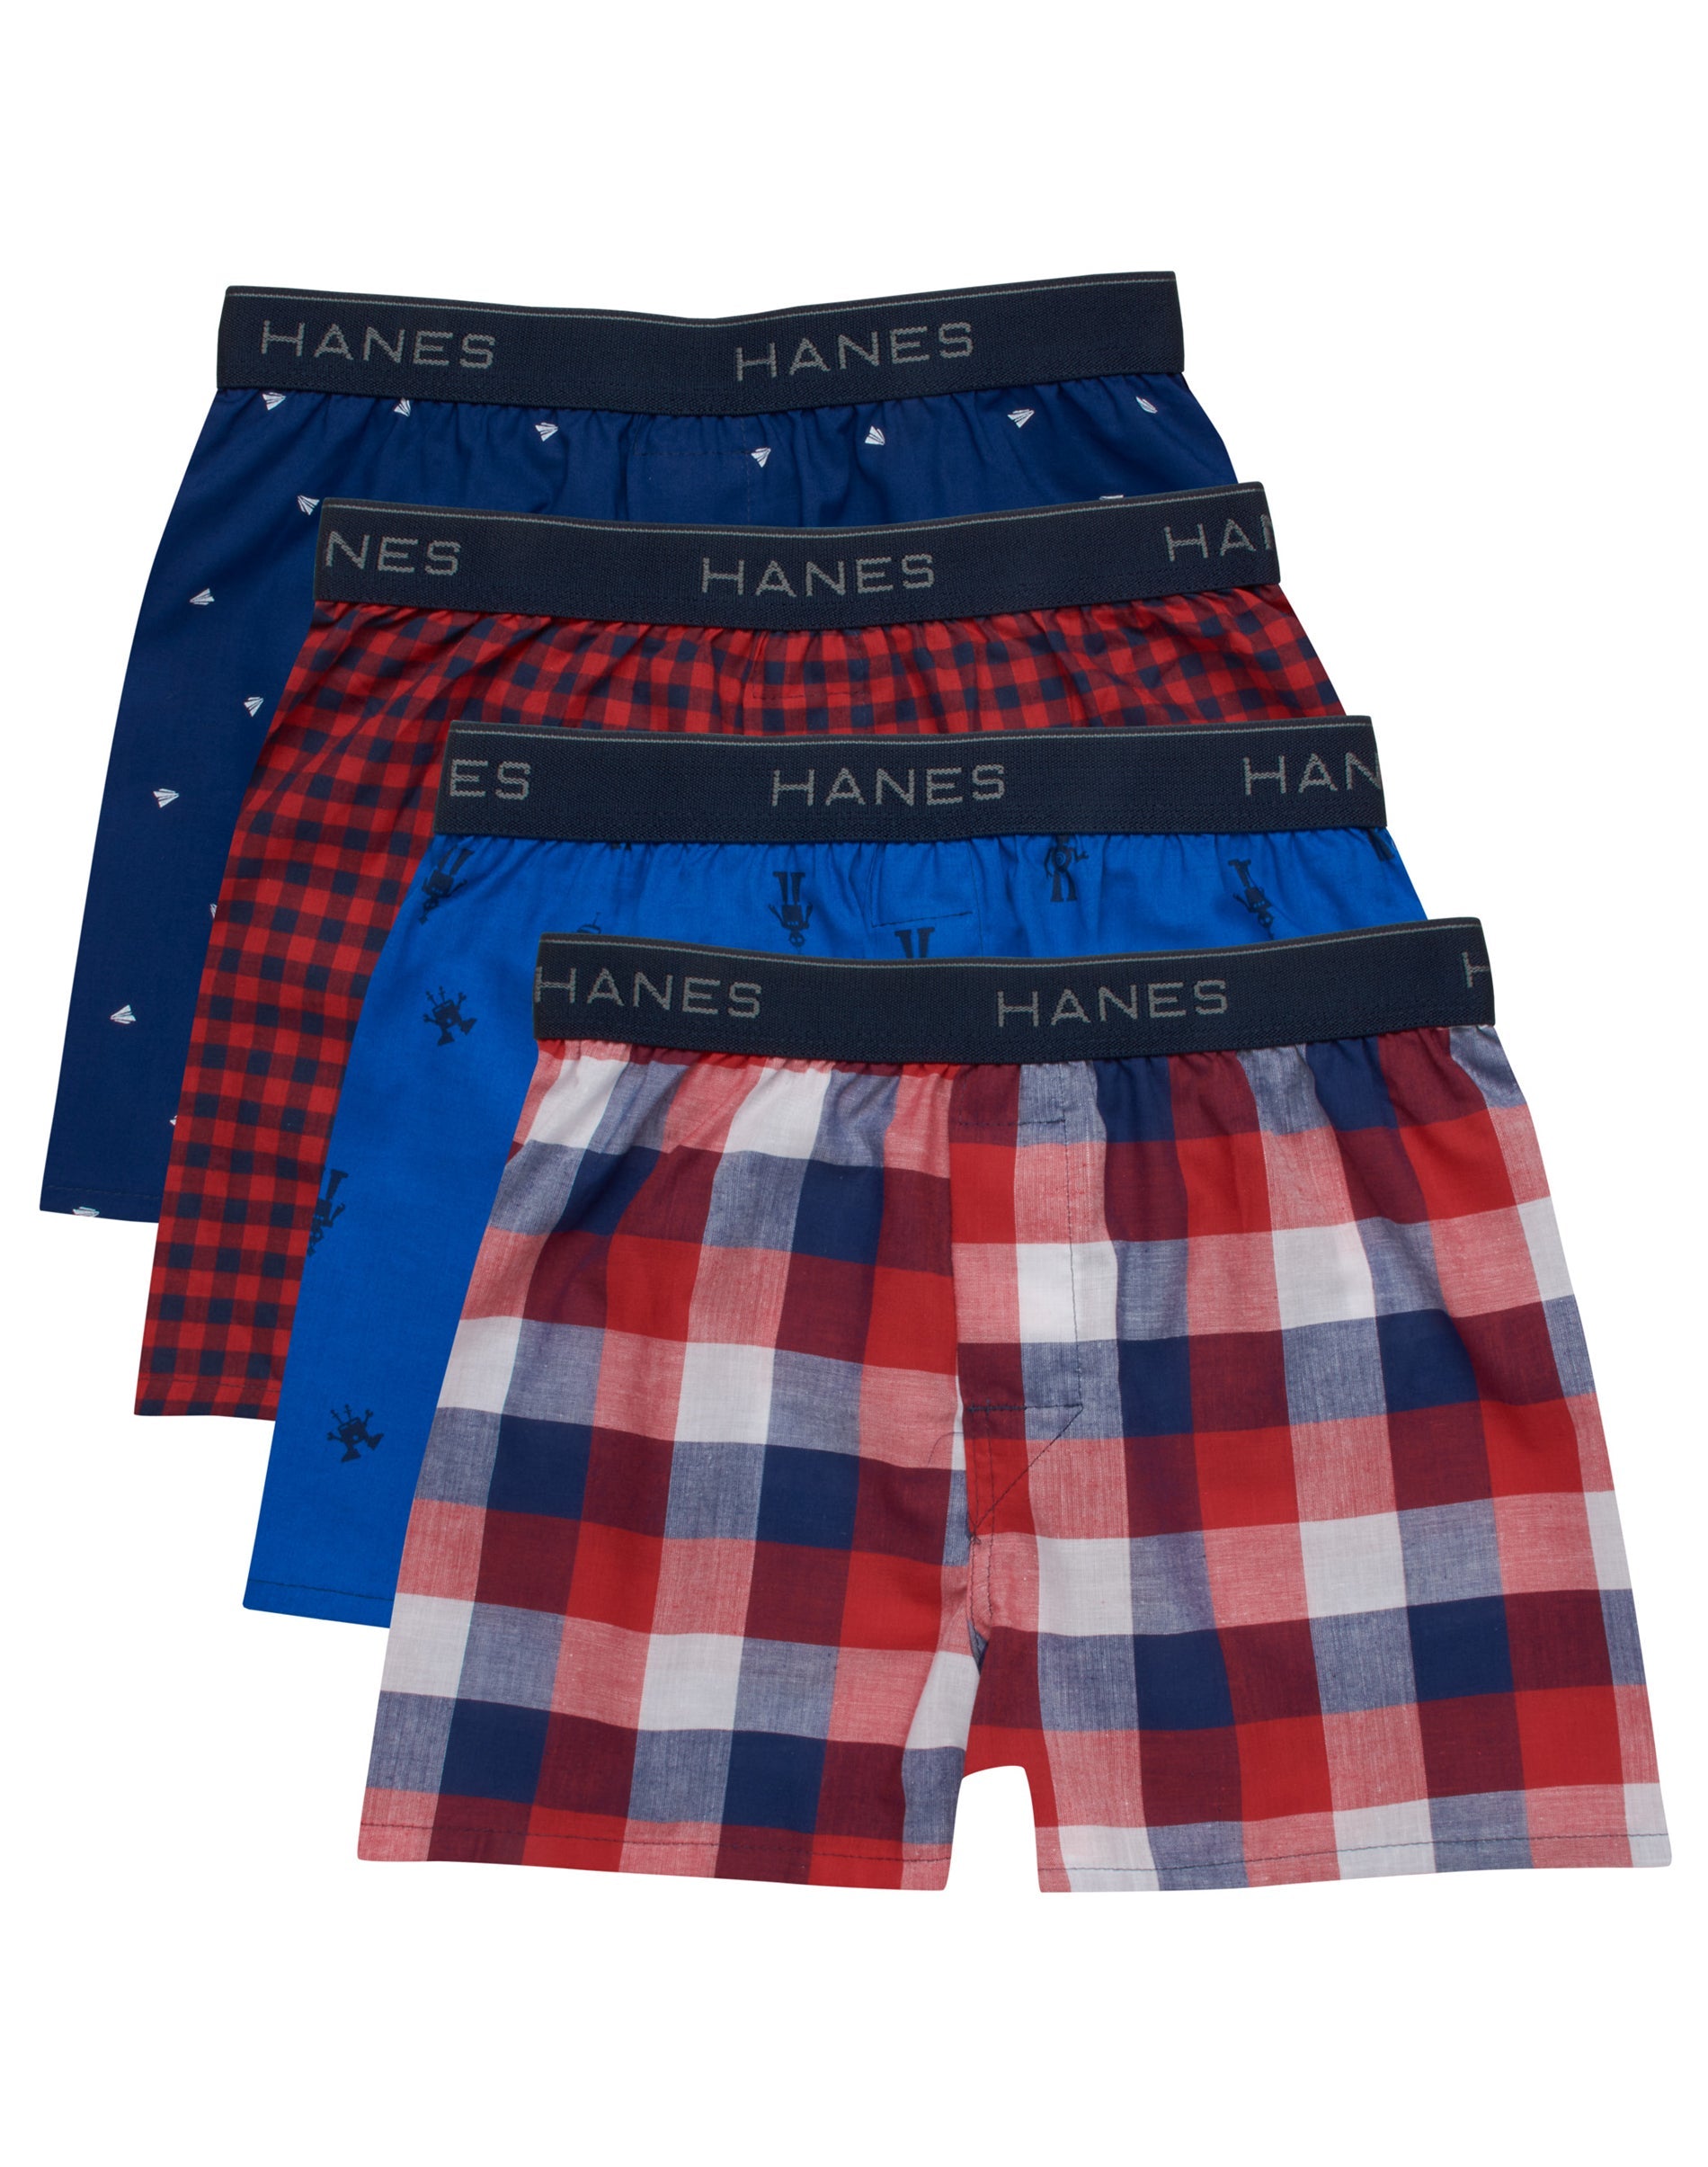 Hanes Men's Value Pack Covered Waistband Boxer Briefs, 6 Pack